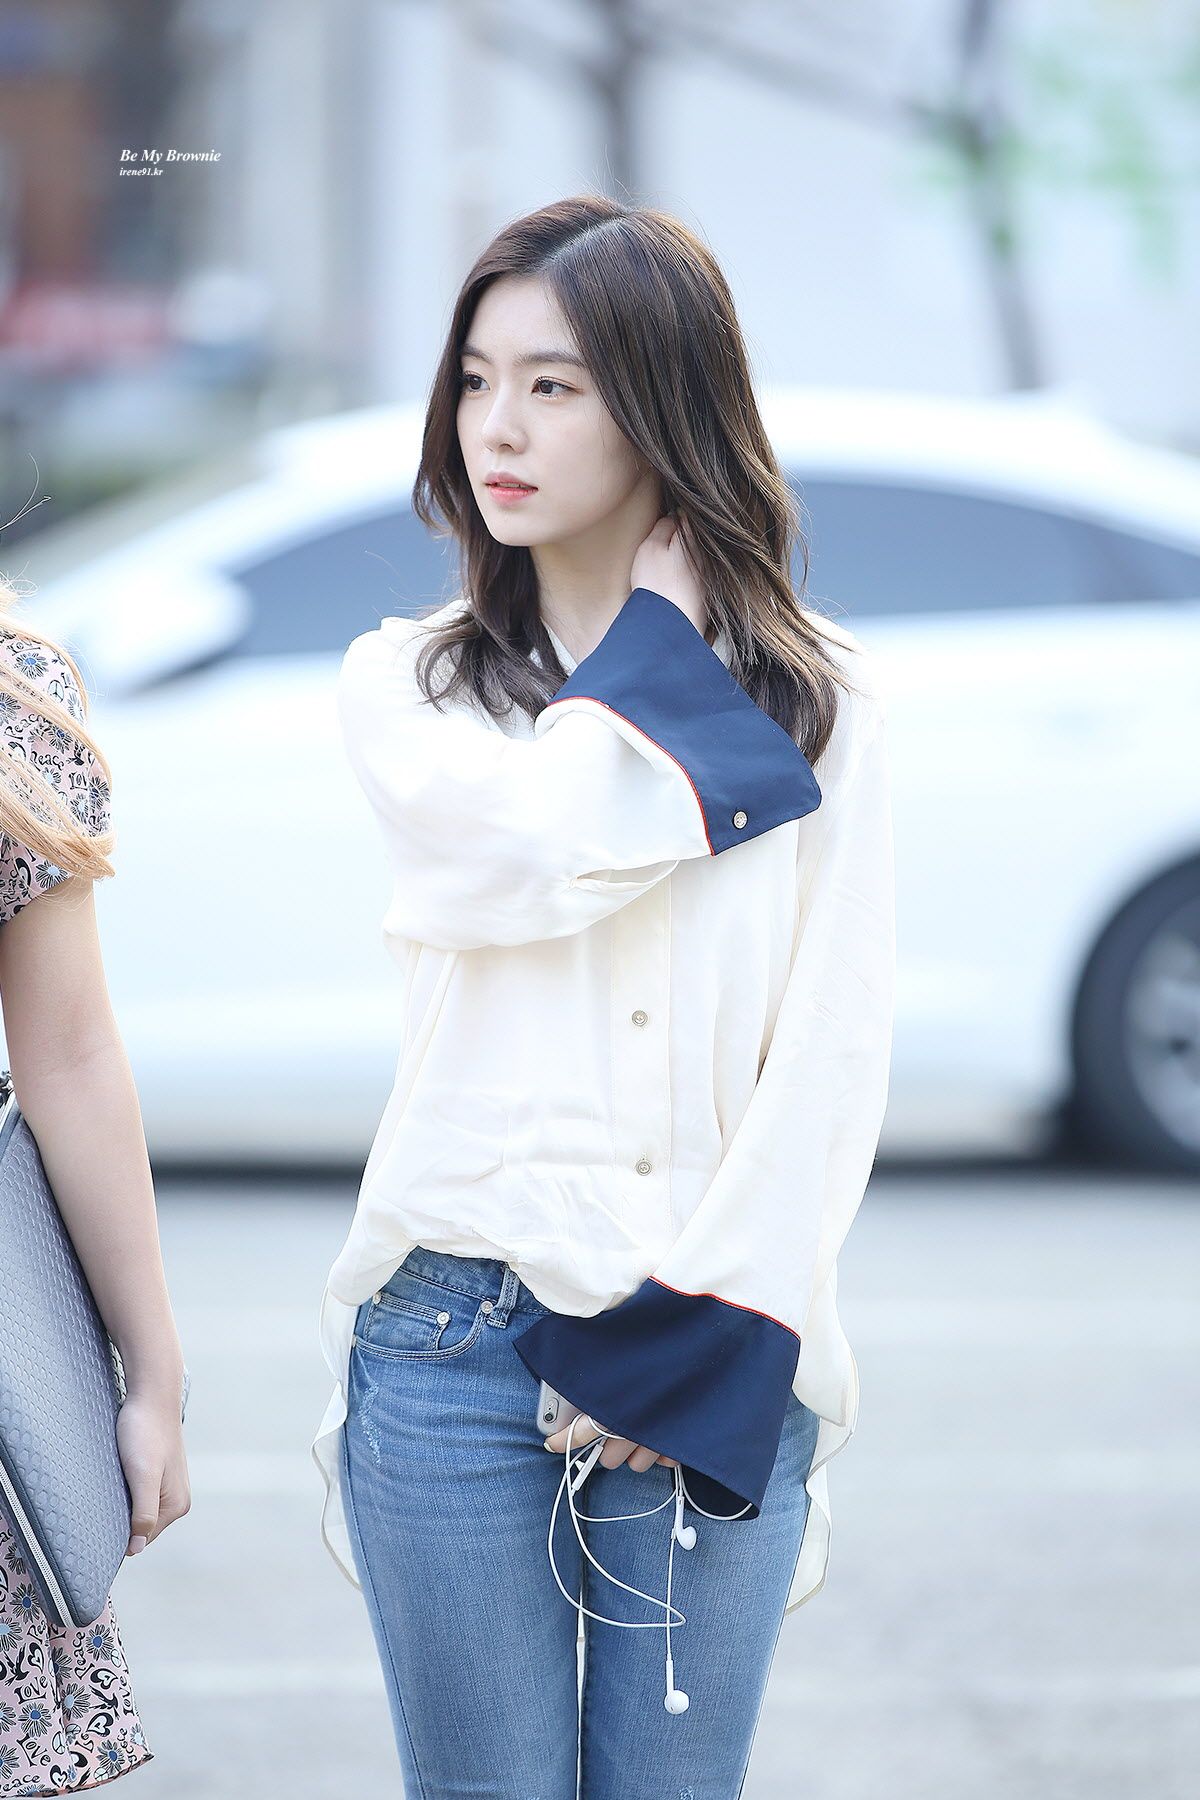 Koreans are saying Irene has a “reverse body figure